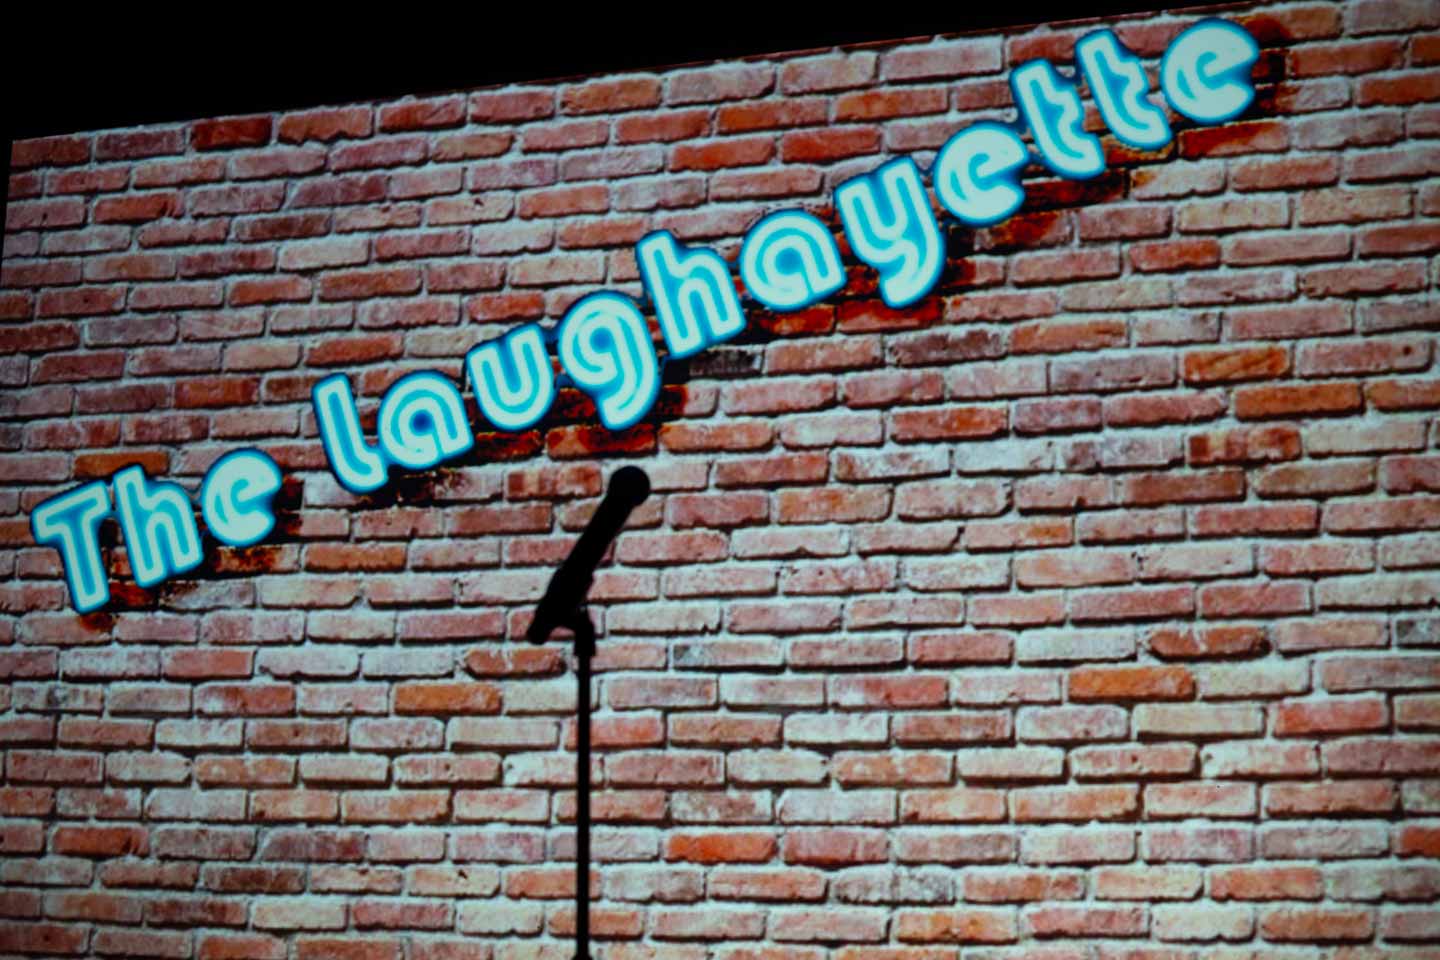 A projection on a brick wall says "The Laughayette."